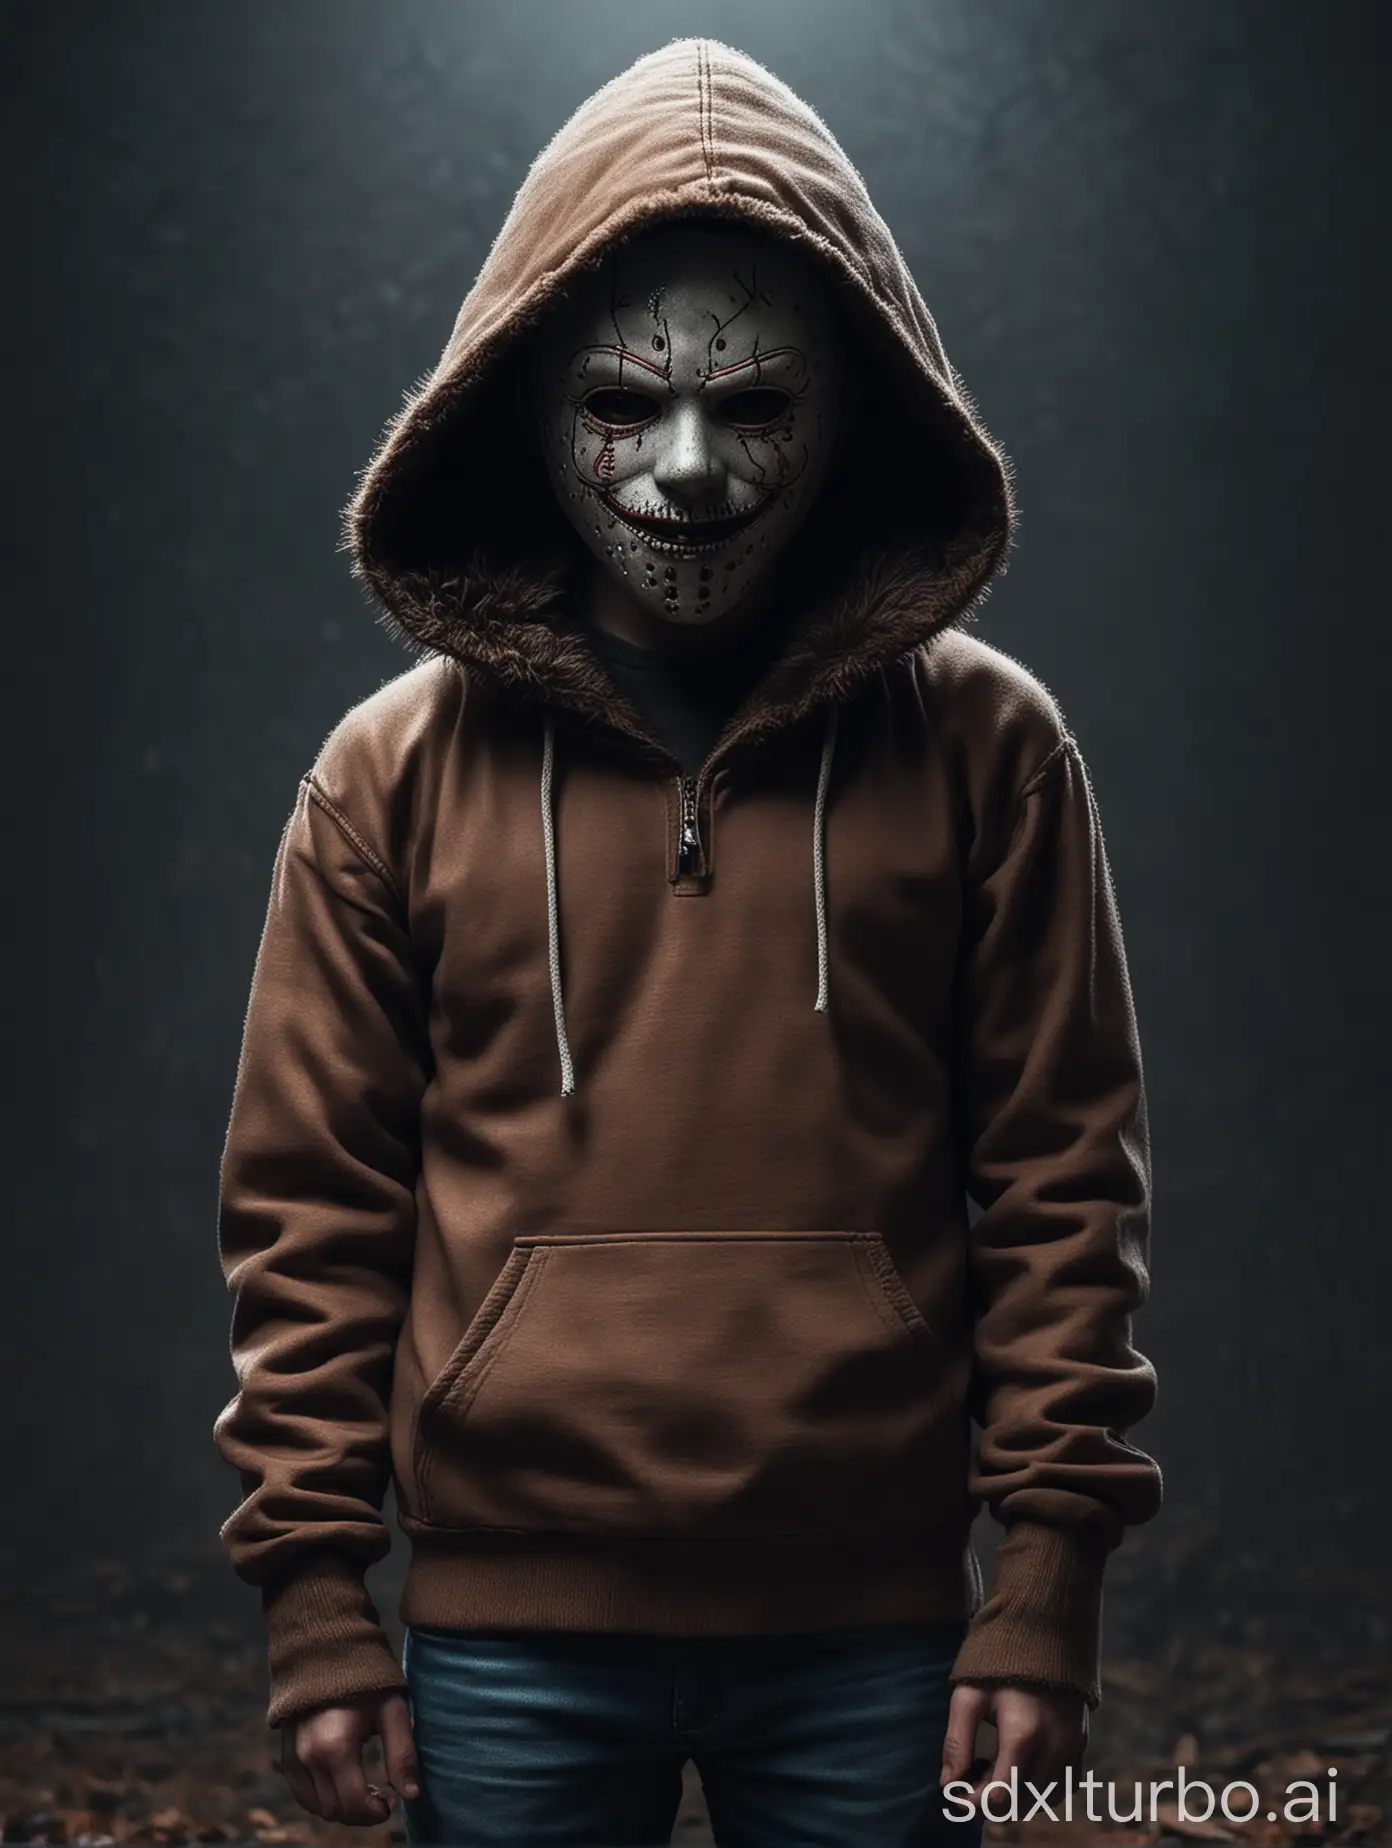 eleven, fur-lined hoodie, stranger things, full body, ultra HD detailed, professional photography, assassin-snood-mouth-mask, horror. Caption in hollow-bold style: 'Hell is also just another Kingdom' below: 'By Byakuran'